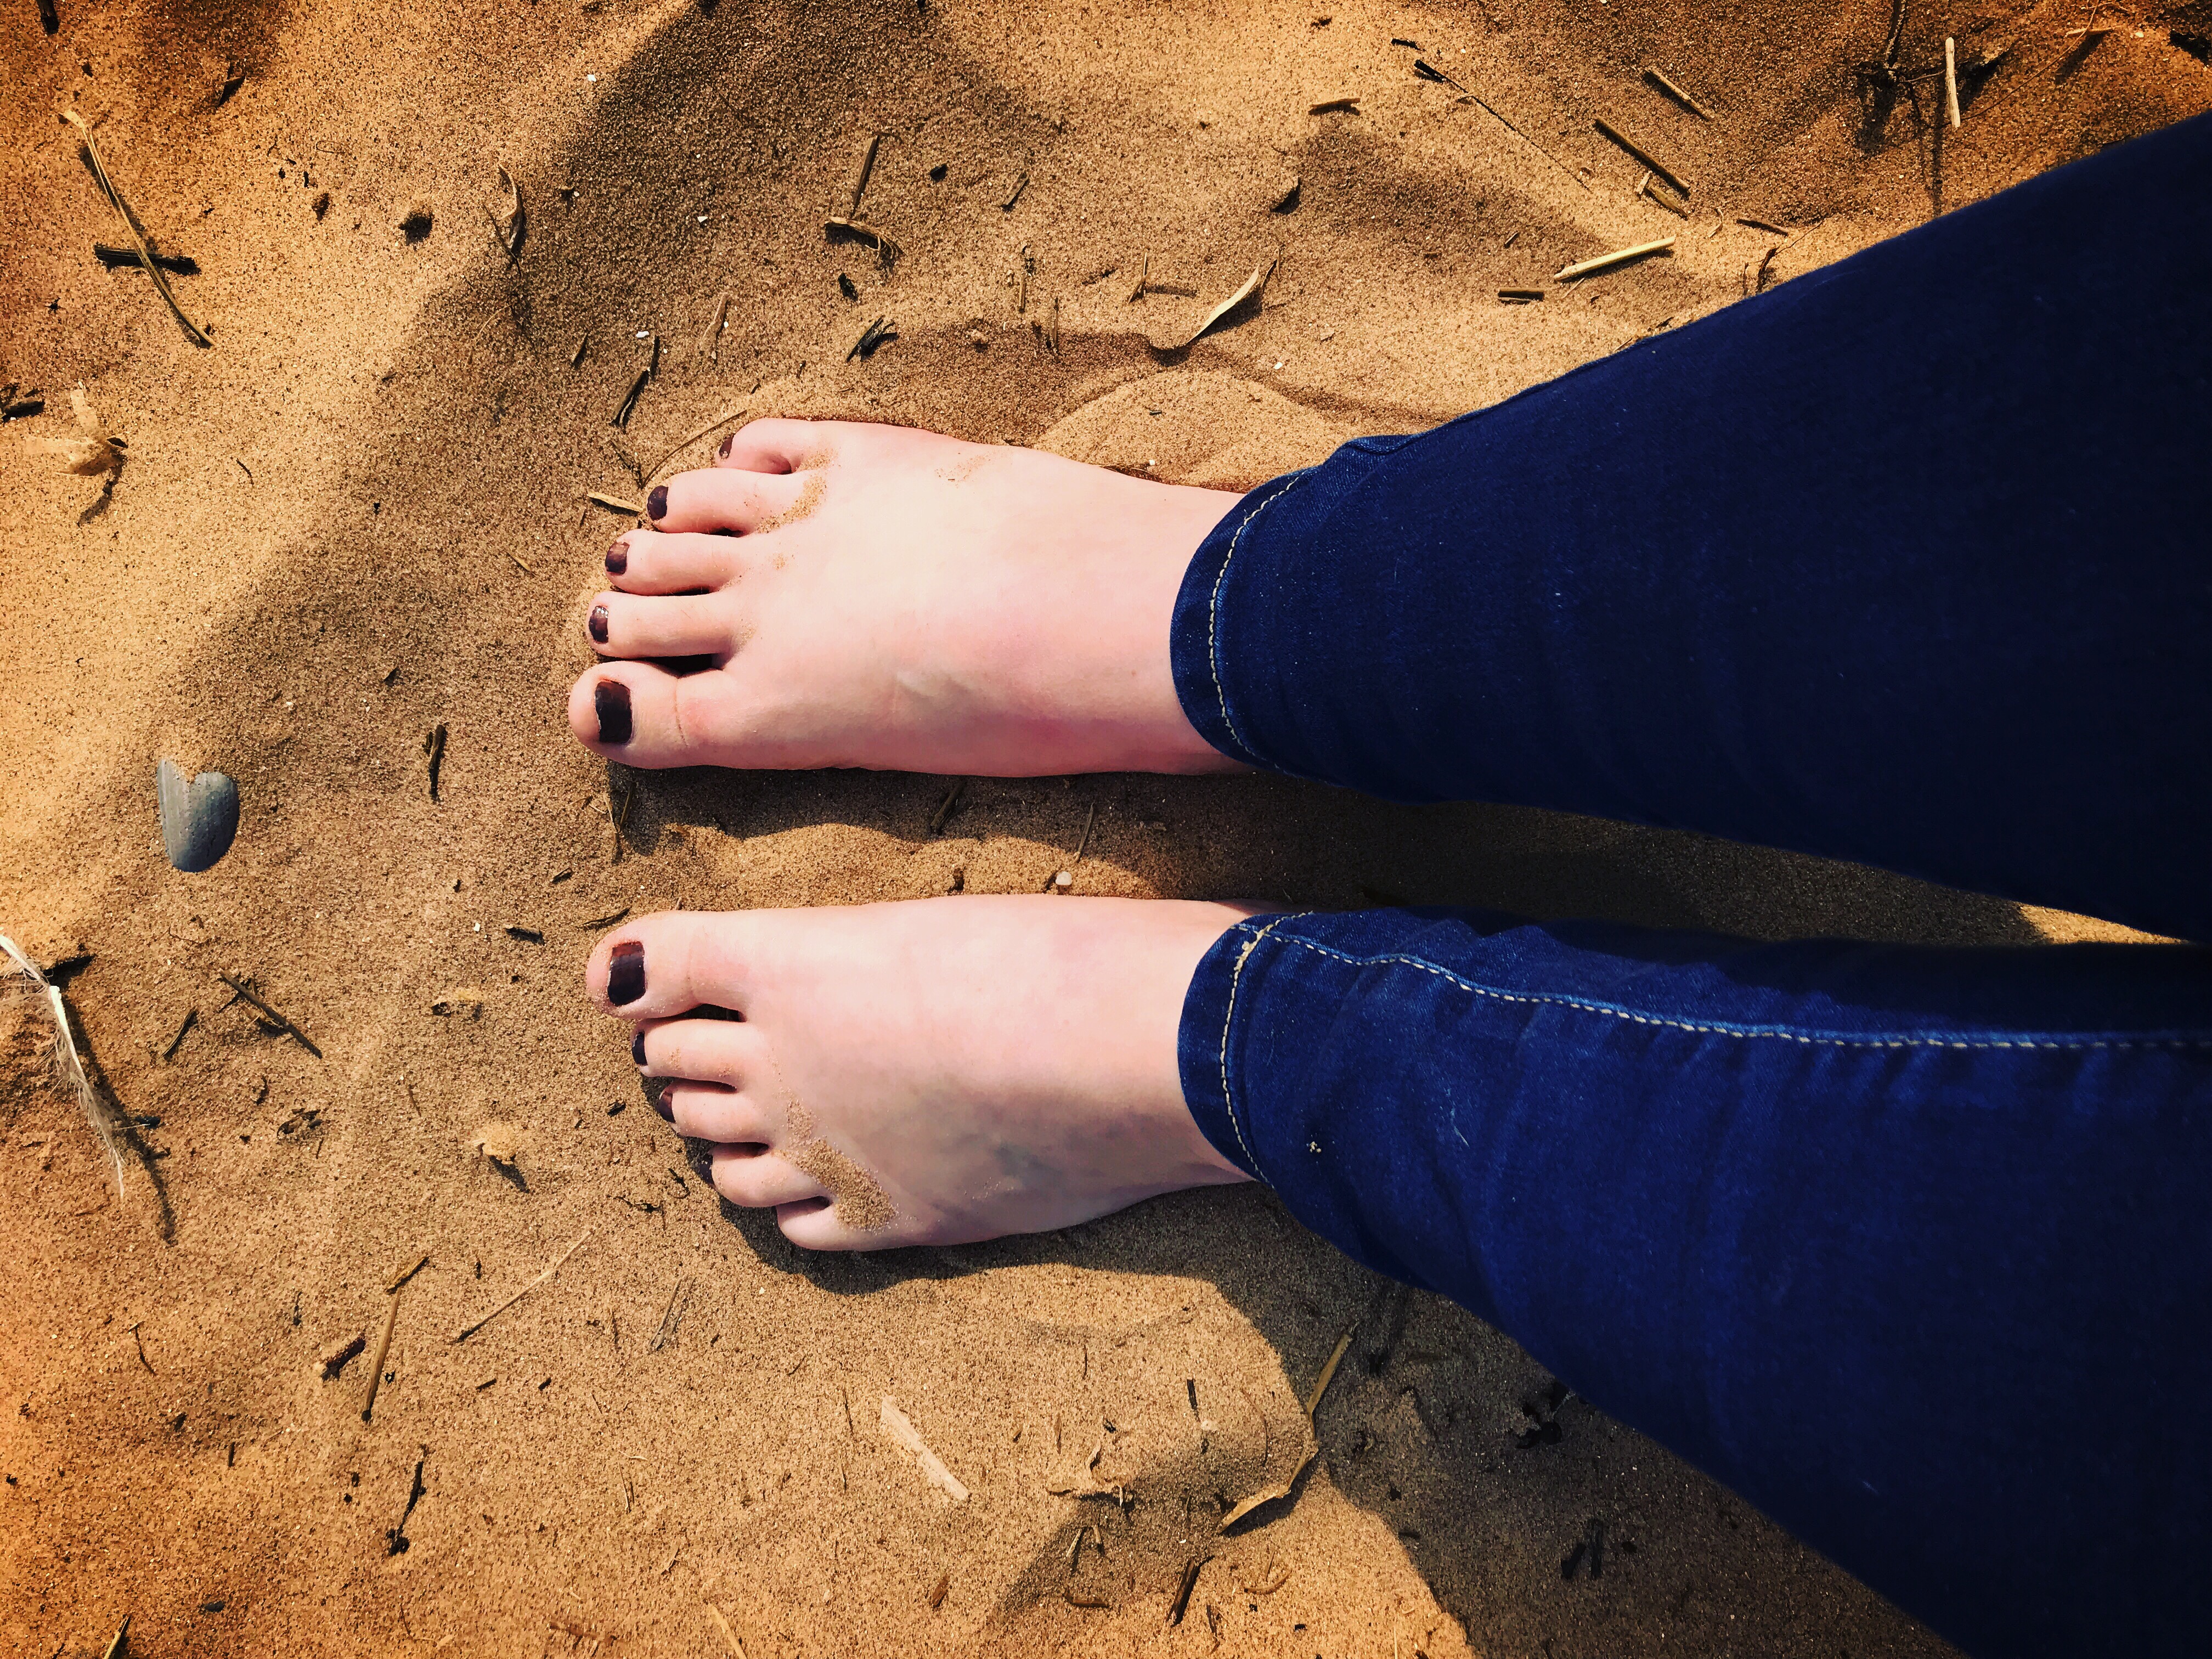 #TheOrdinaryMoments - Feel The Sand Between Your Toes